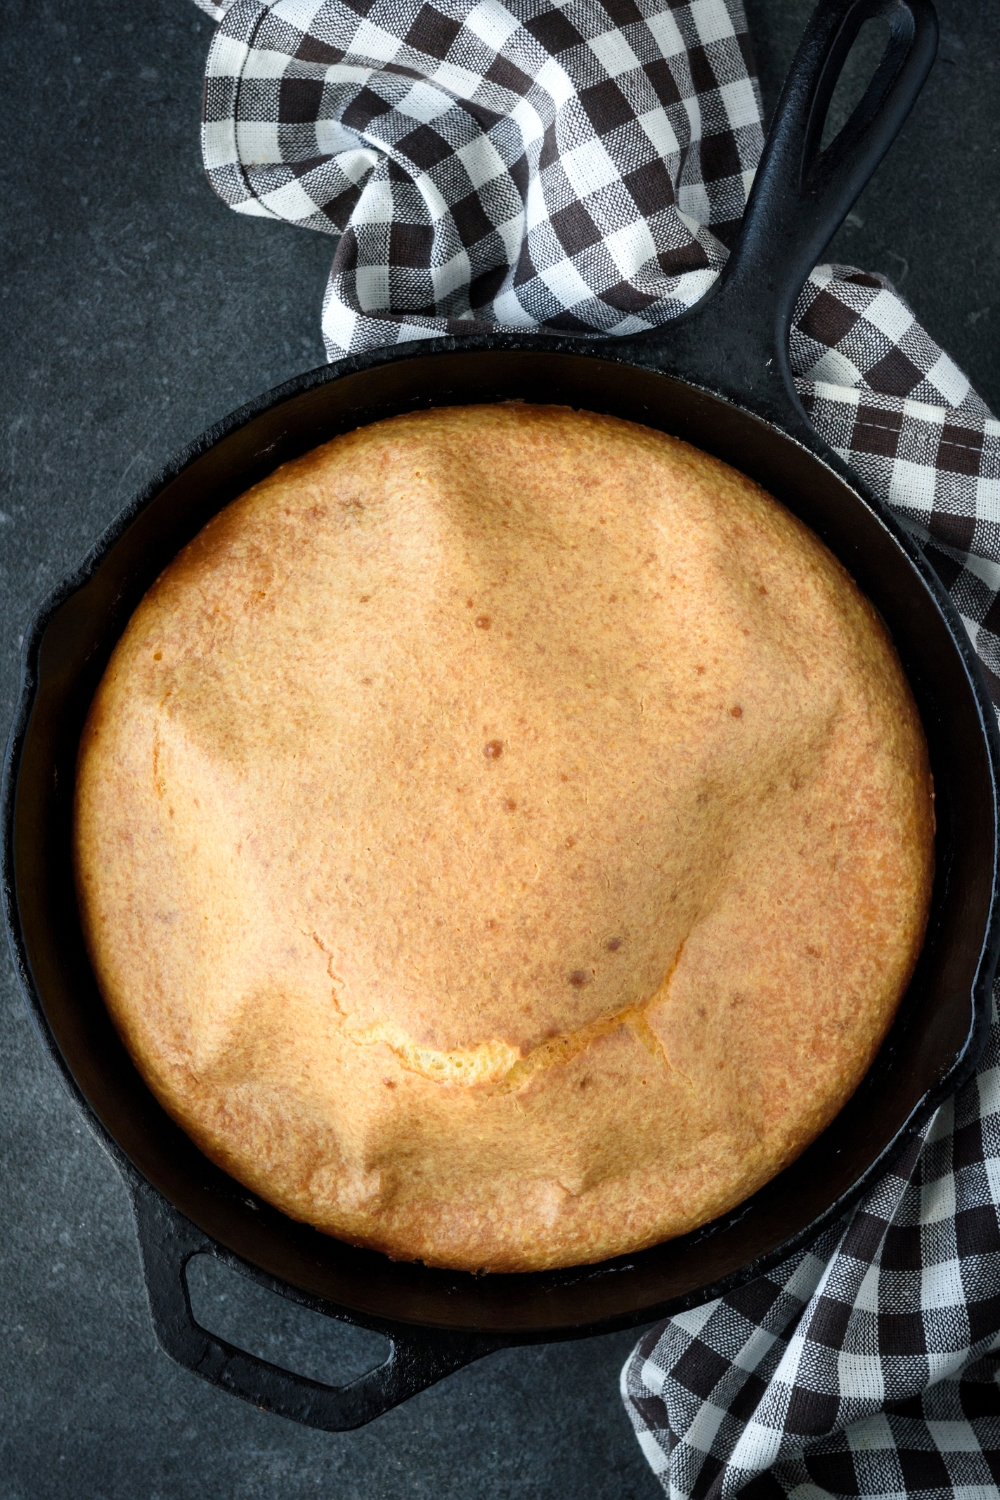 A cast iron skillet full of golden brown cornbread on a black counter. A black and white dish towel is under the skillet.